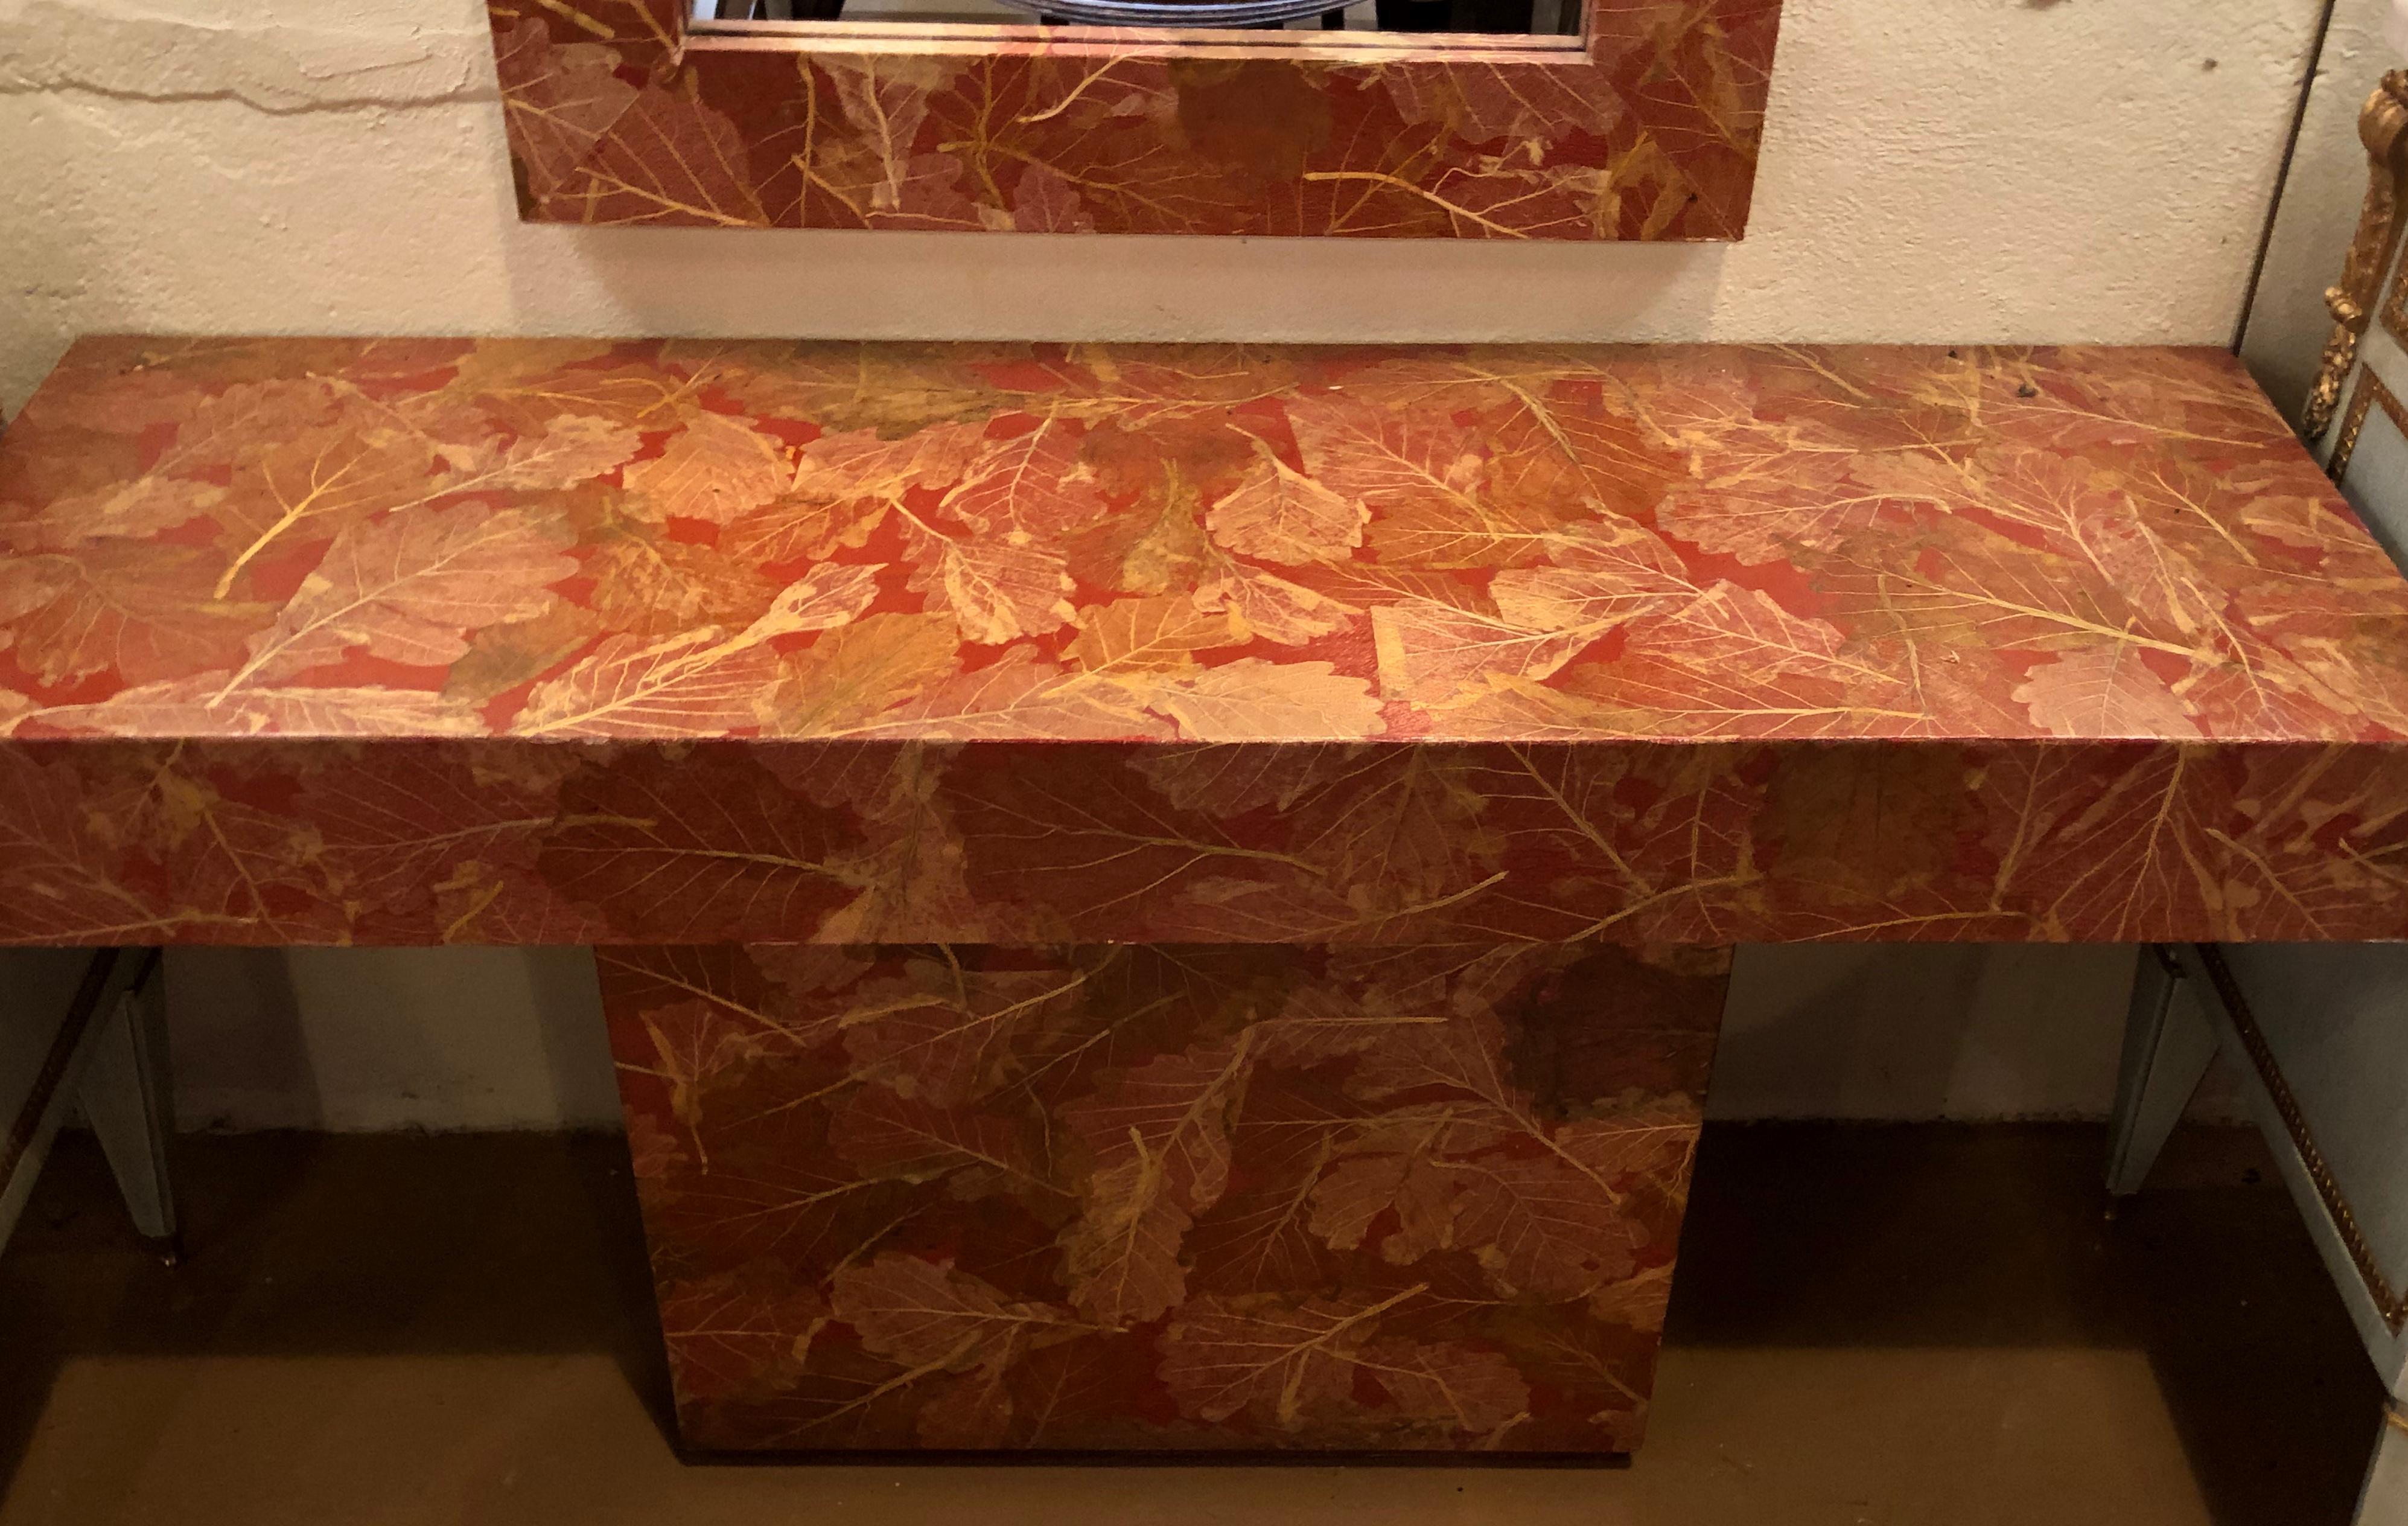 Rose and gold leave design decoupage painted console / vanity with matching mirror. This lovely set has a beautiful salmon and gold color throughout depicting flowing leaves and vine design.
The mirror measures 28 inches height, 49.5 width, and